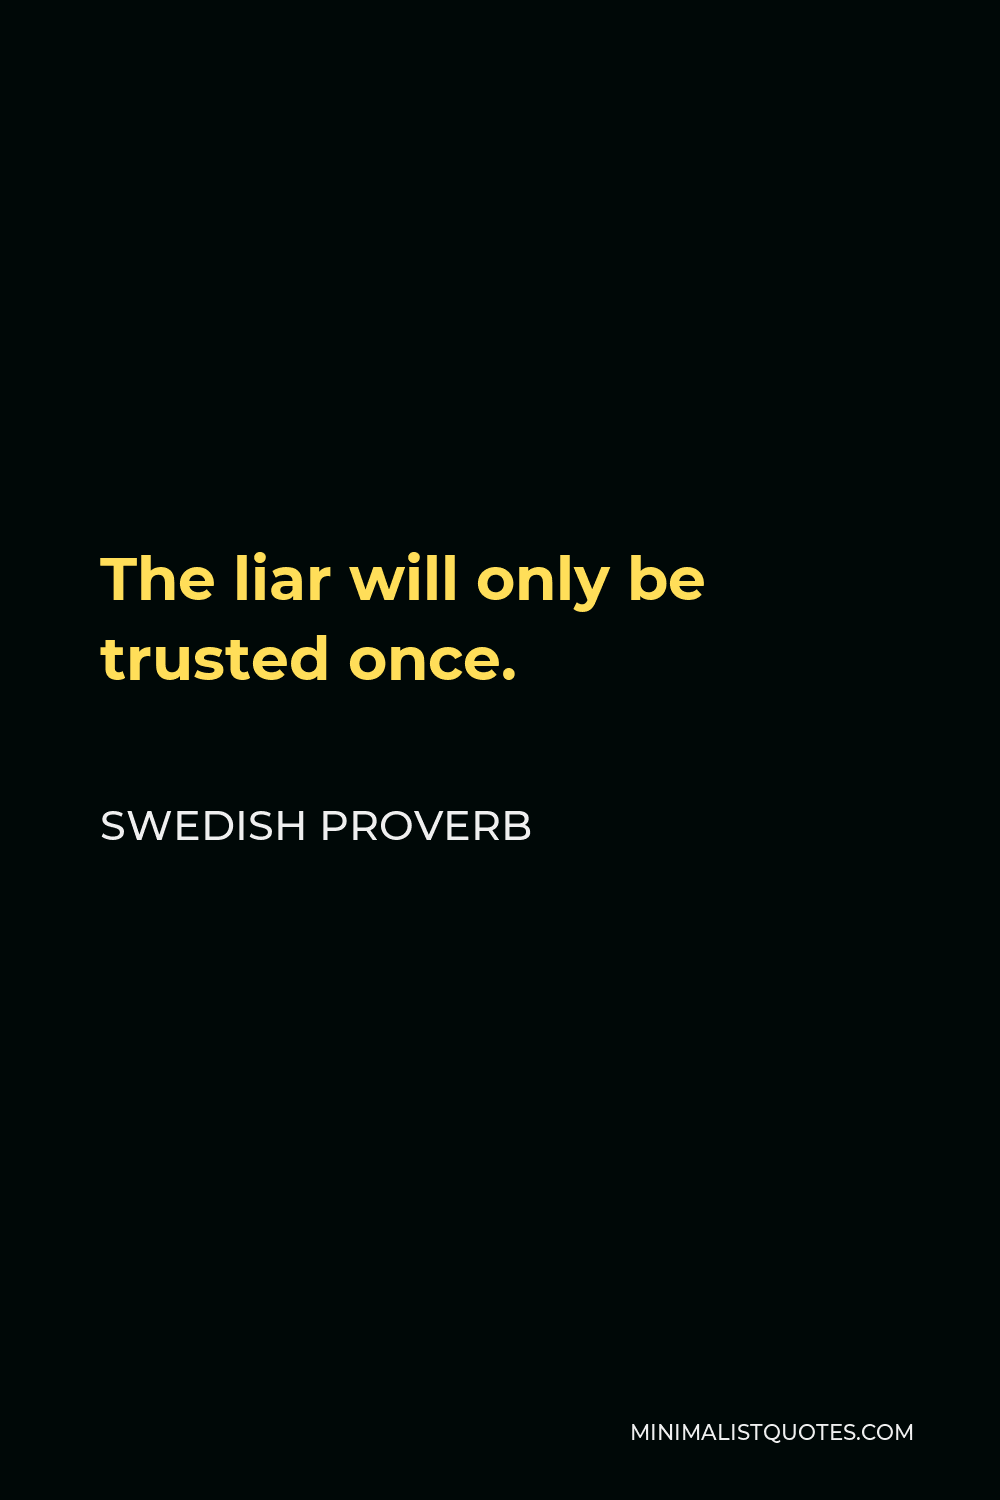 Swedish Proverb Quote - The liar will only be trusted once.